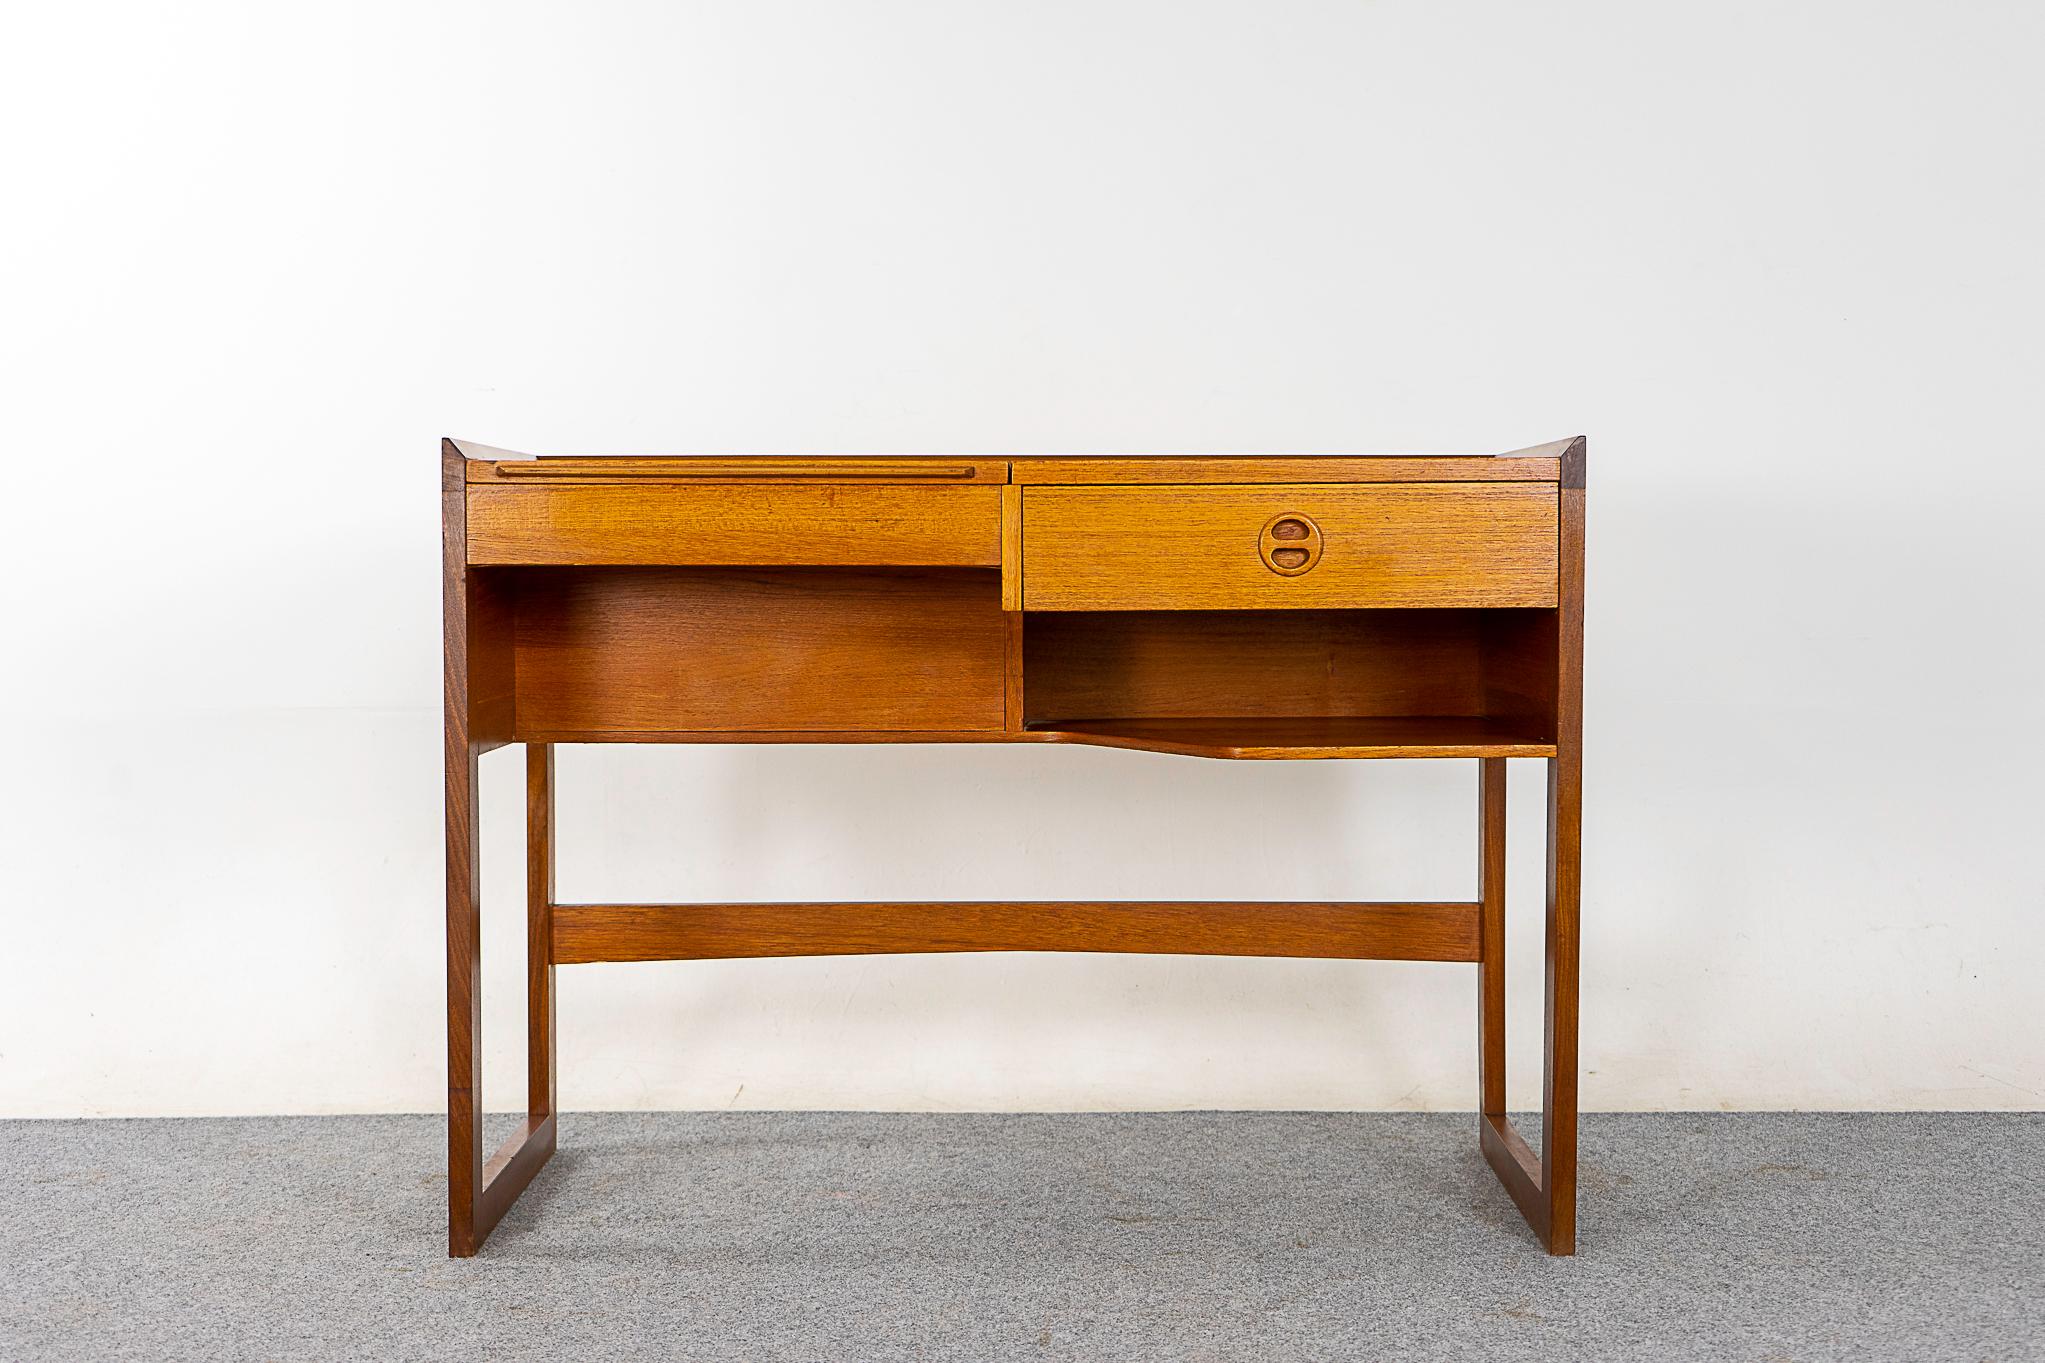 Teak vanity by Arne Wahl Iversen for Ikea, circa 1960s. Compact vanity with solid wood trim and dovetail construction. Platform lifts to reveal mirror and fitted interior storage.

Unrestored item, some marks consistent with age.

Please inquire for